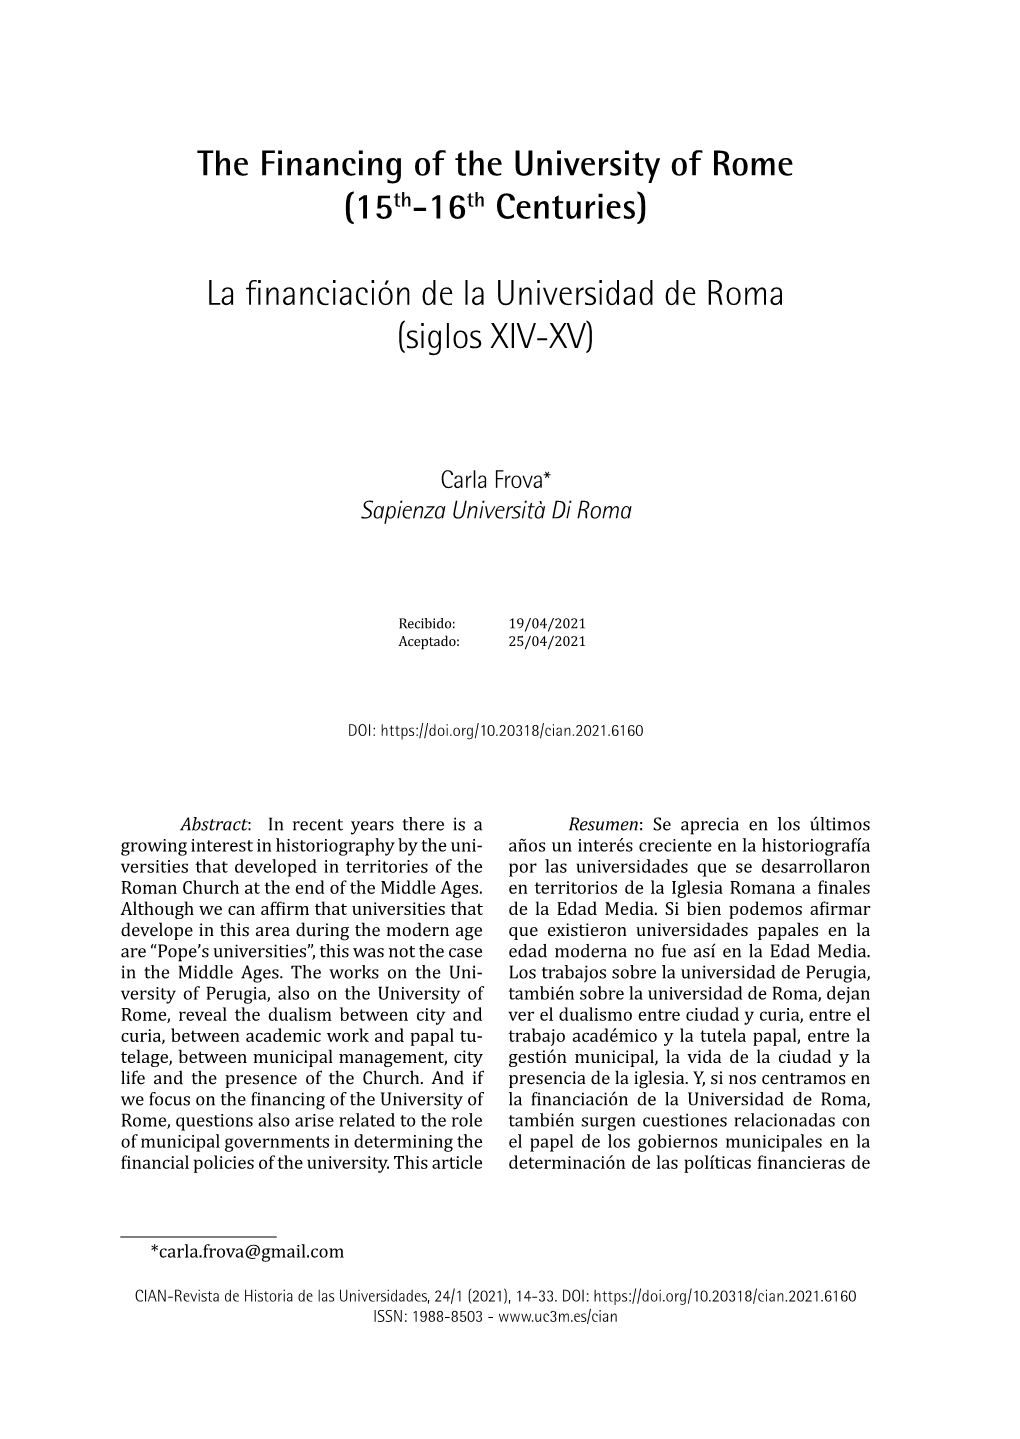 The Financing of the University of Rome(15Th-16Th